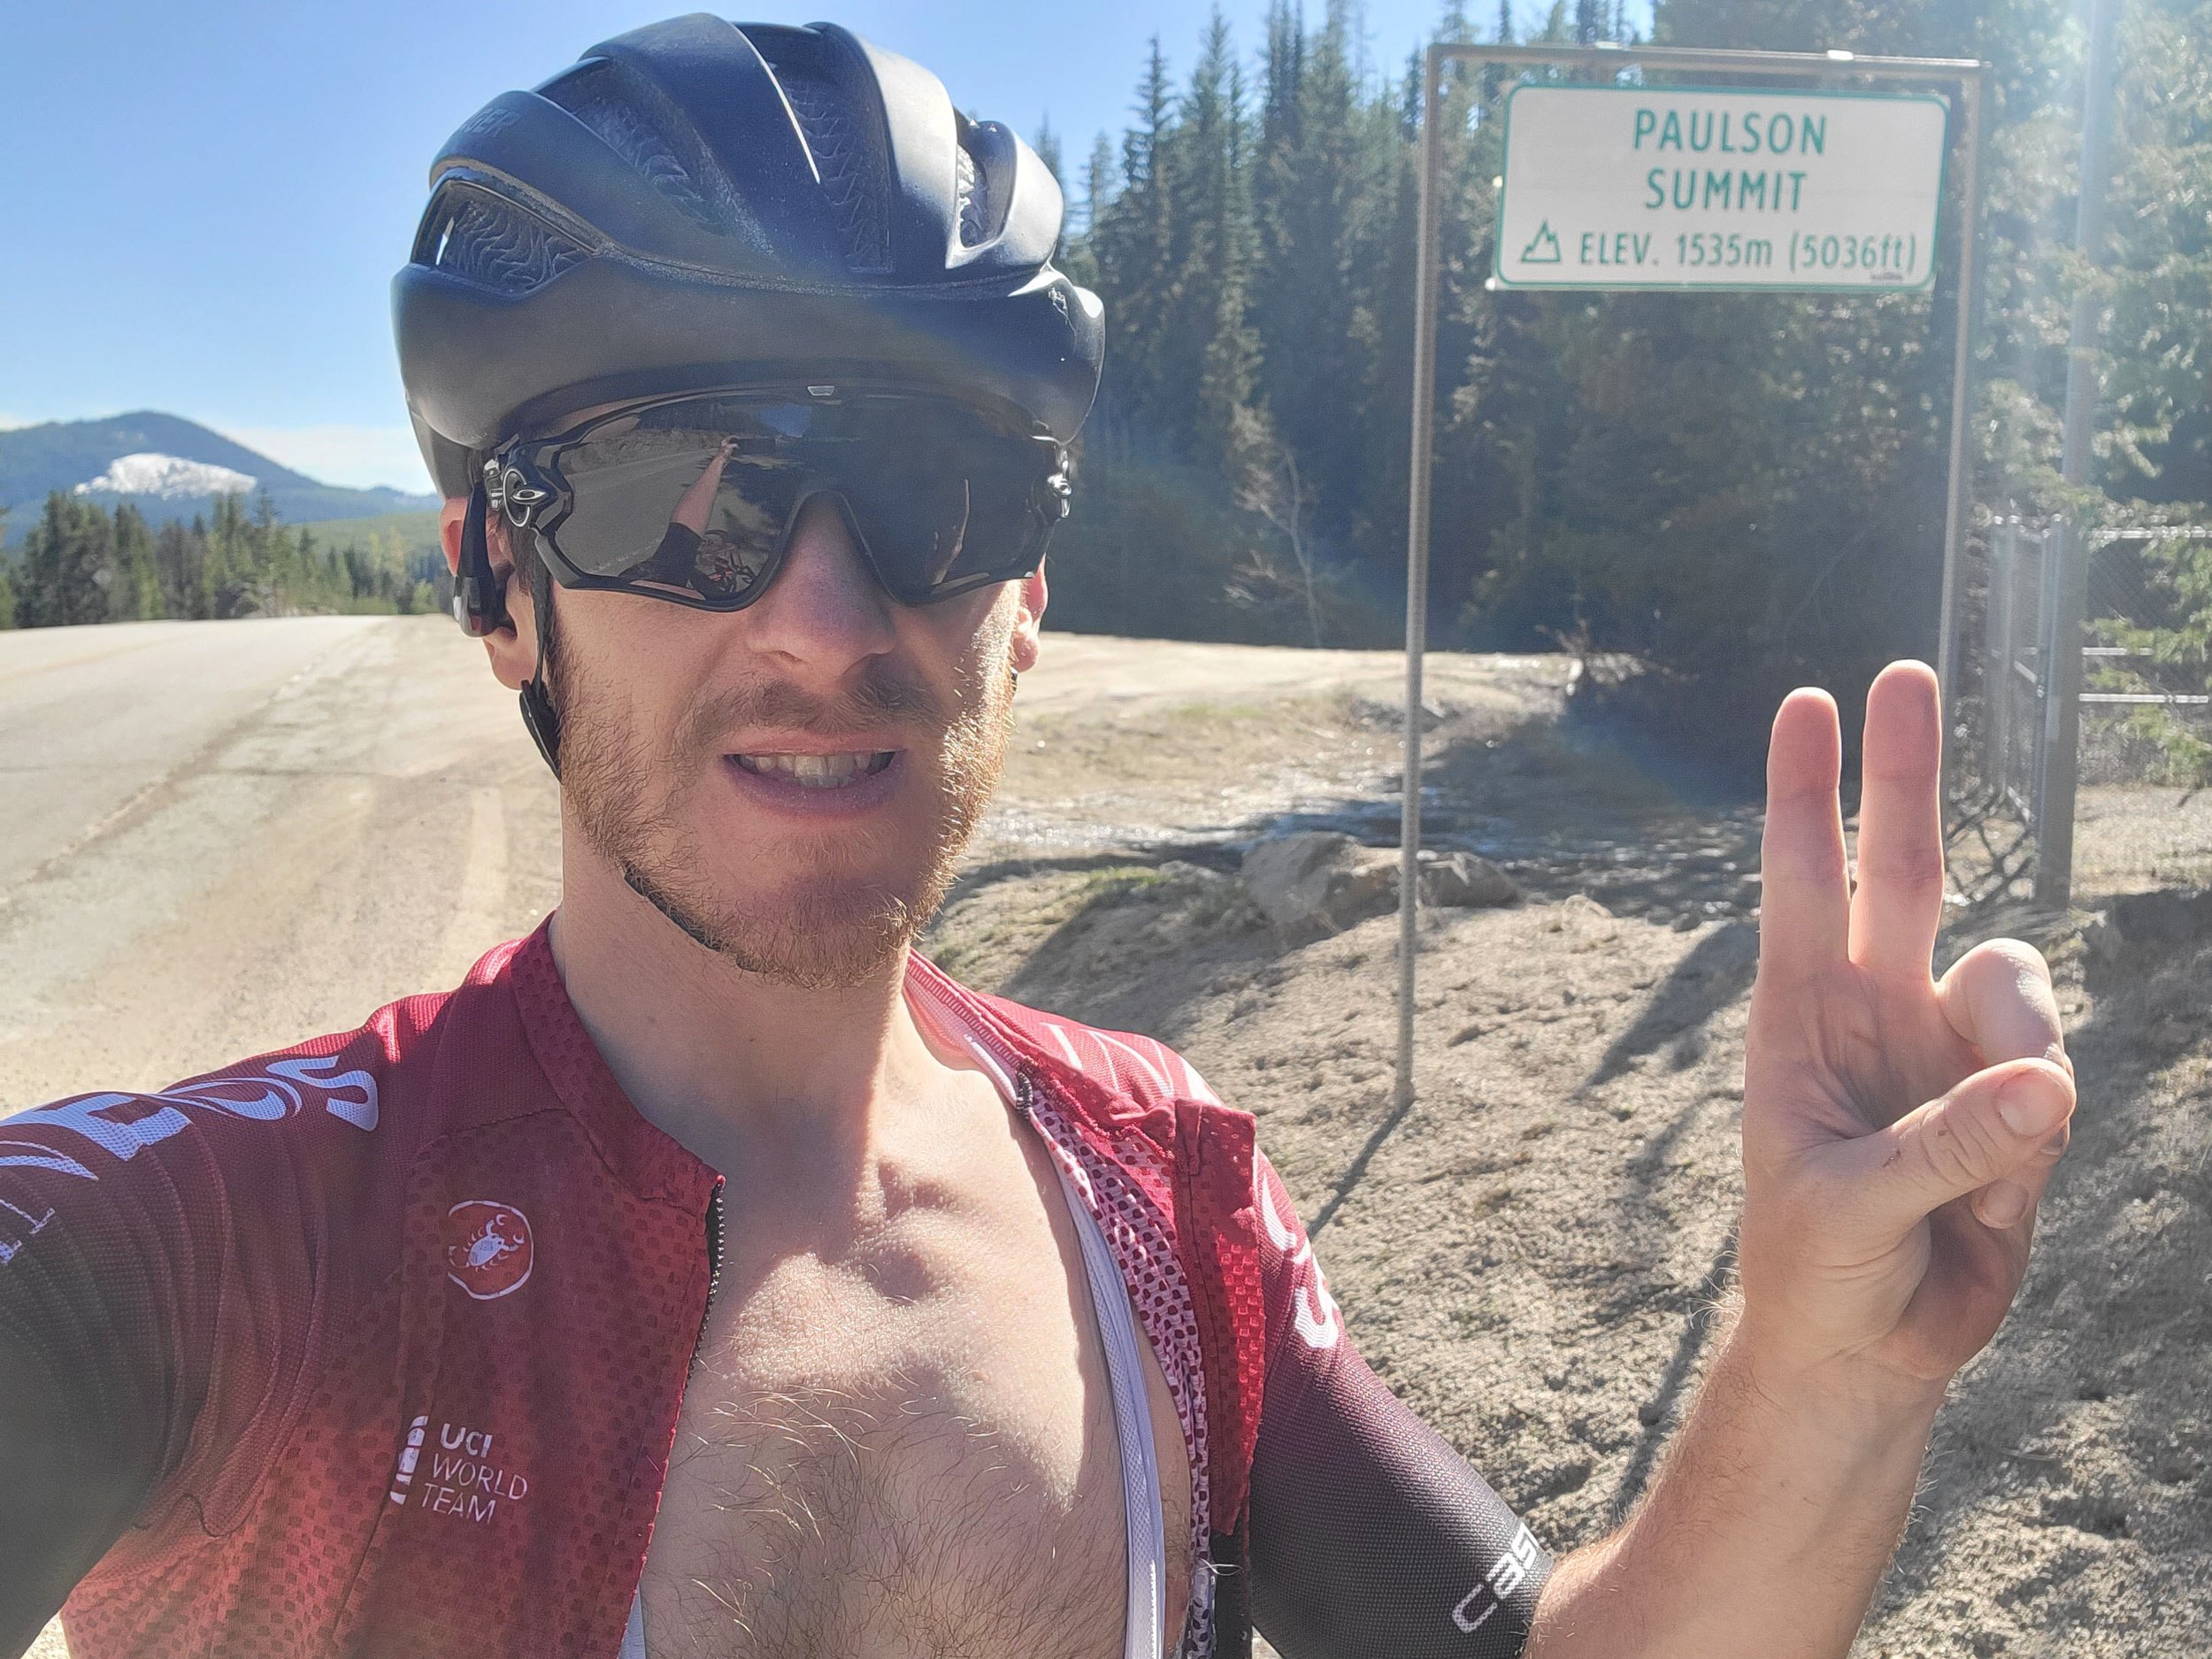 Top. Climb is 1000m. These "elevation" road signs are cheating. Why don't you put one on the moon too, that's really high elevation. Count from the earth's core while you're at it.